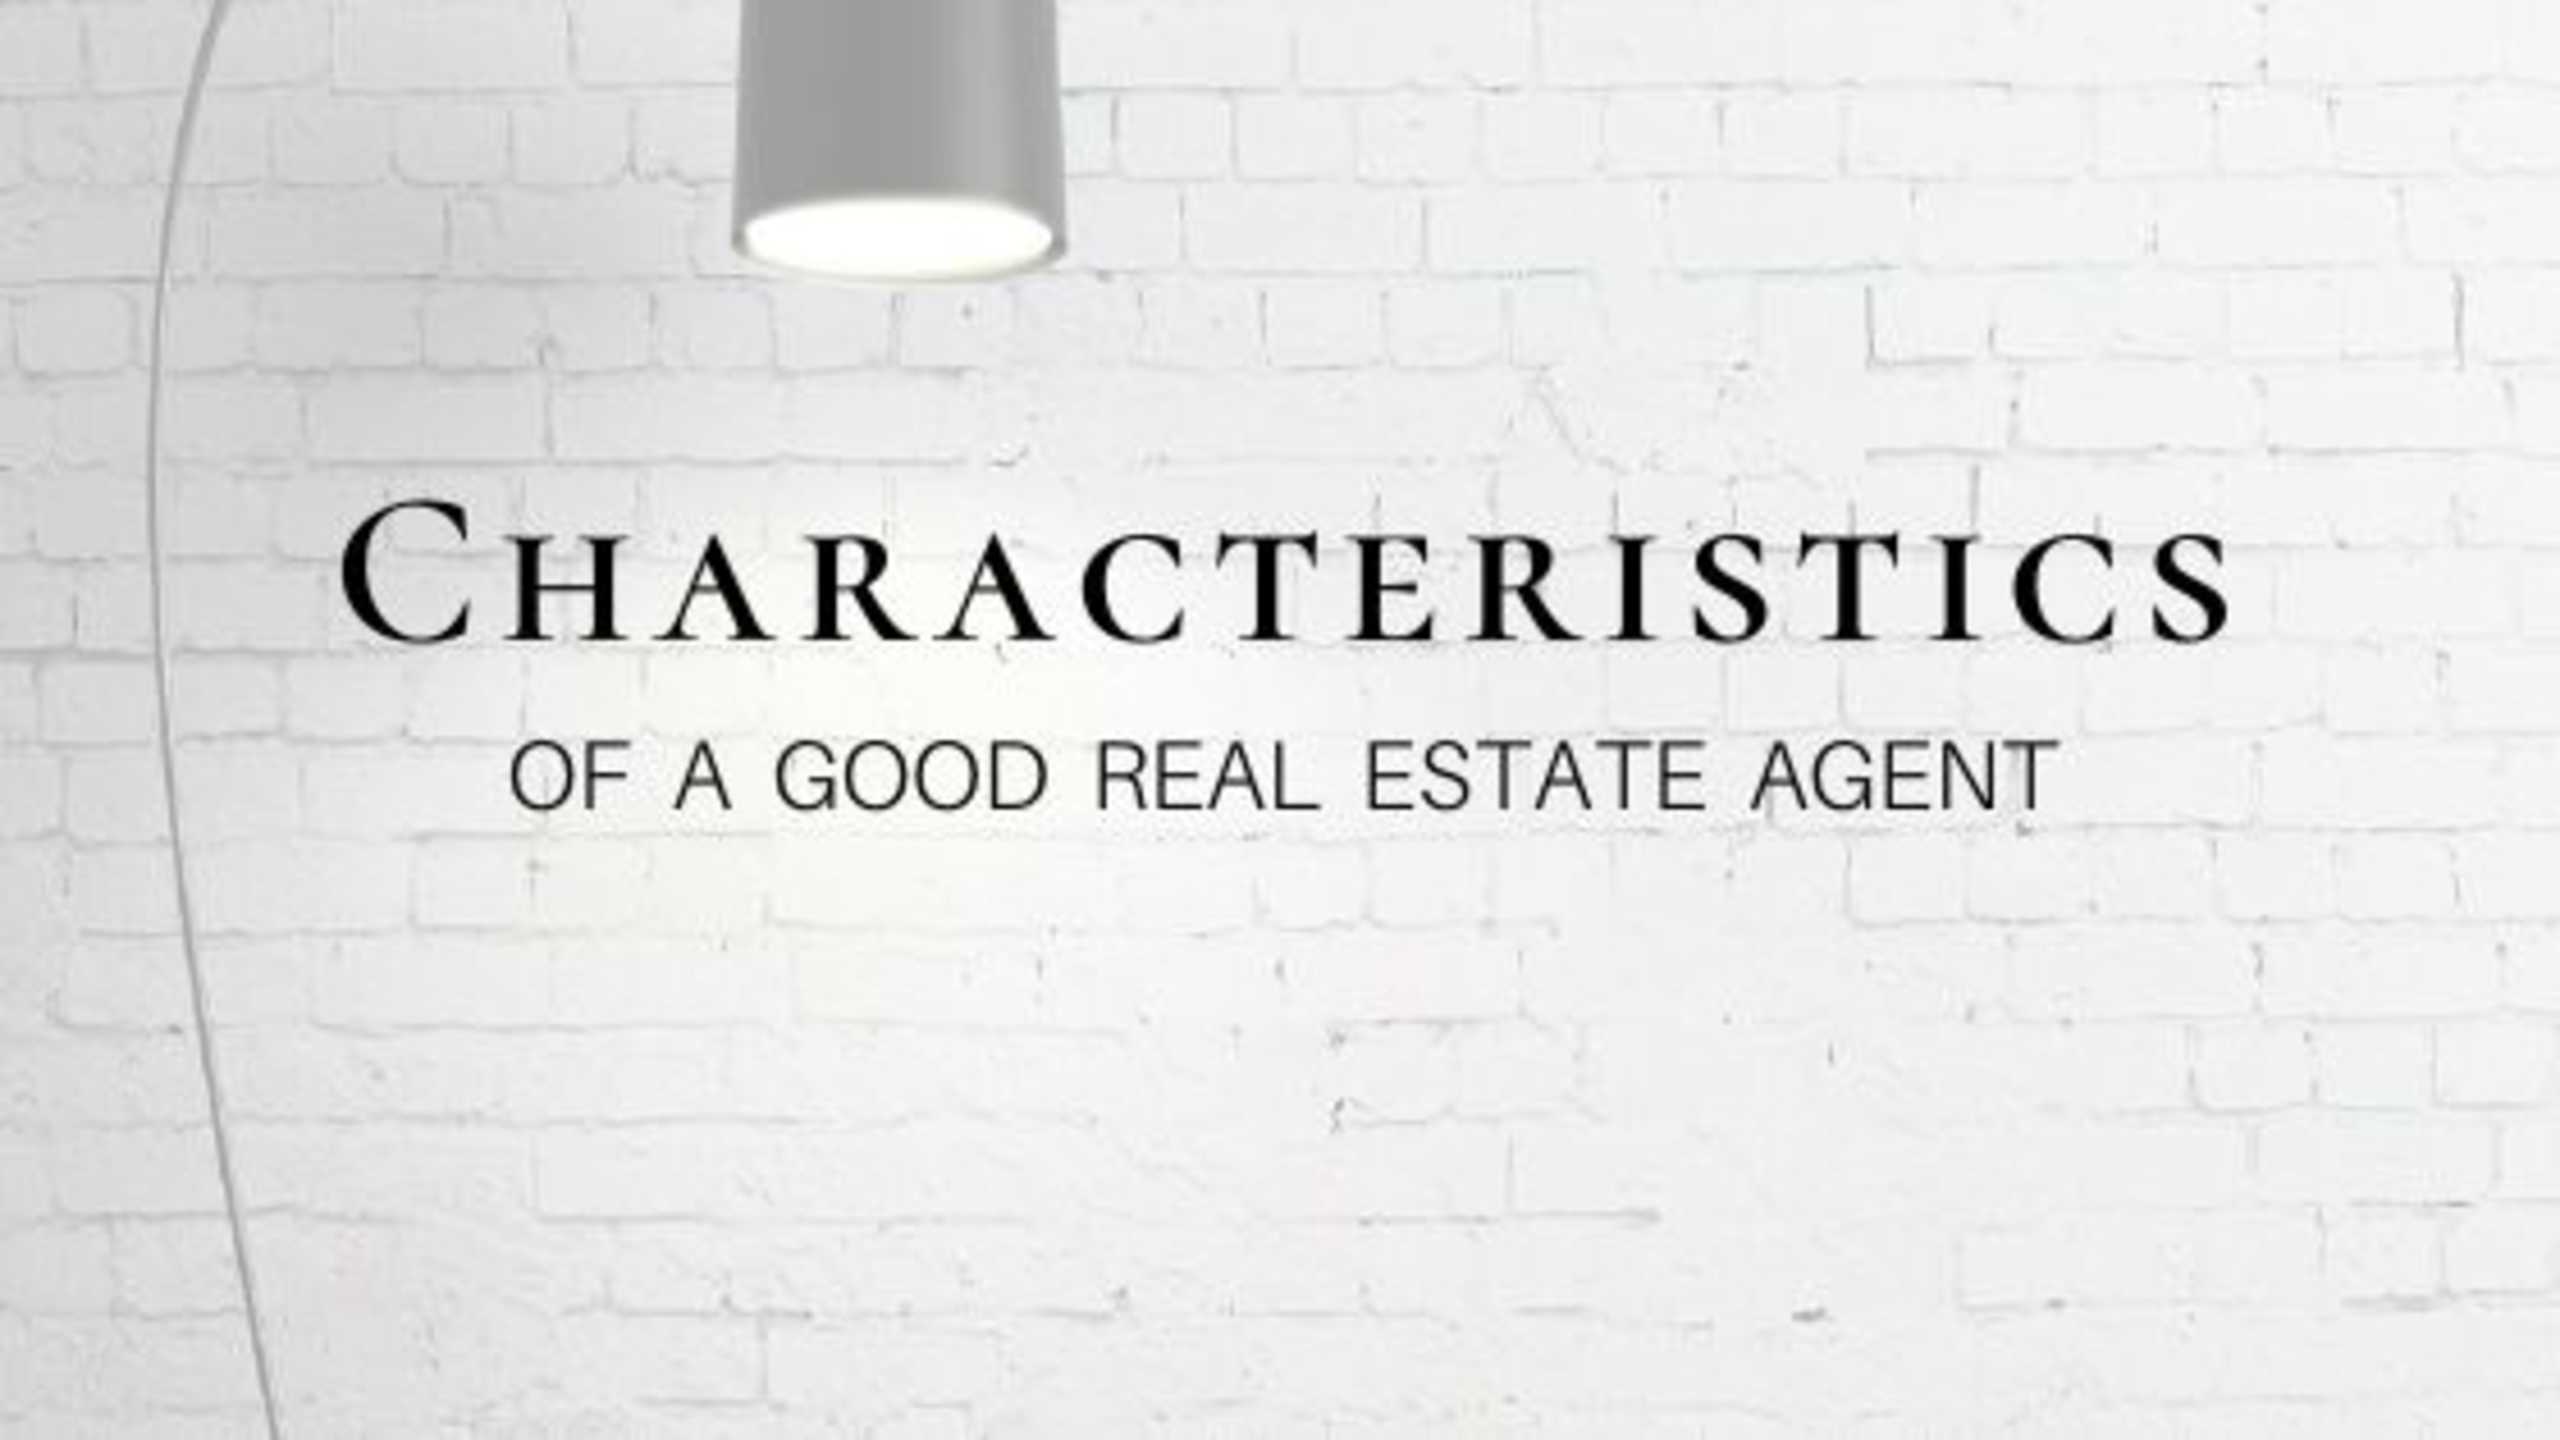 Click Here to Find Out What You Should Look For in an Agent